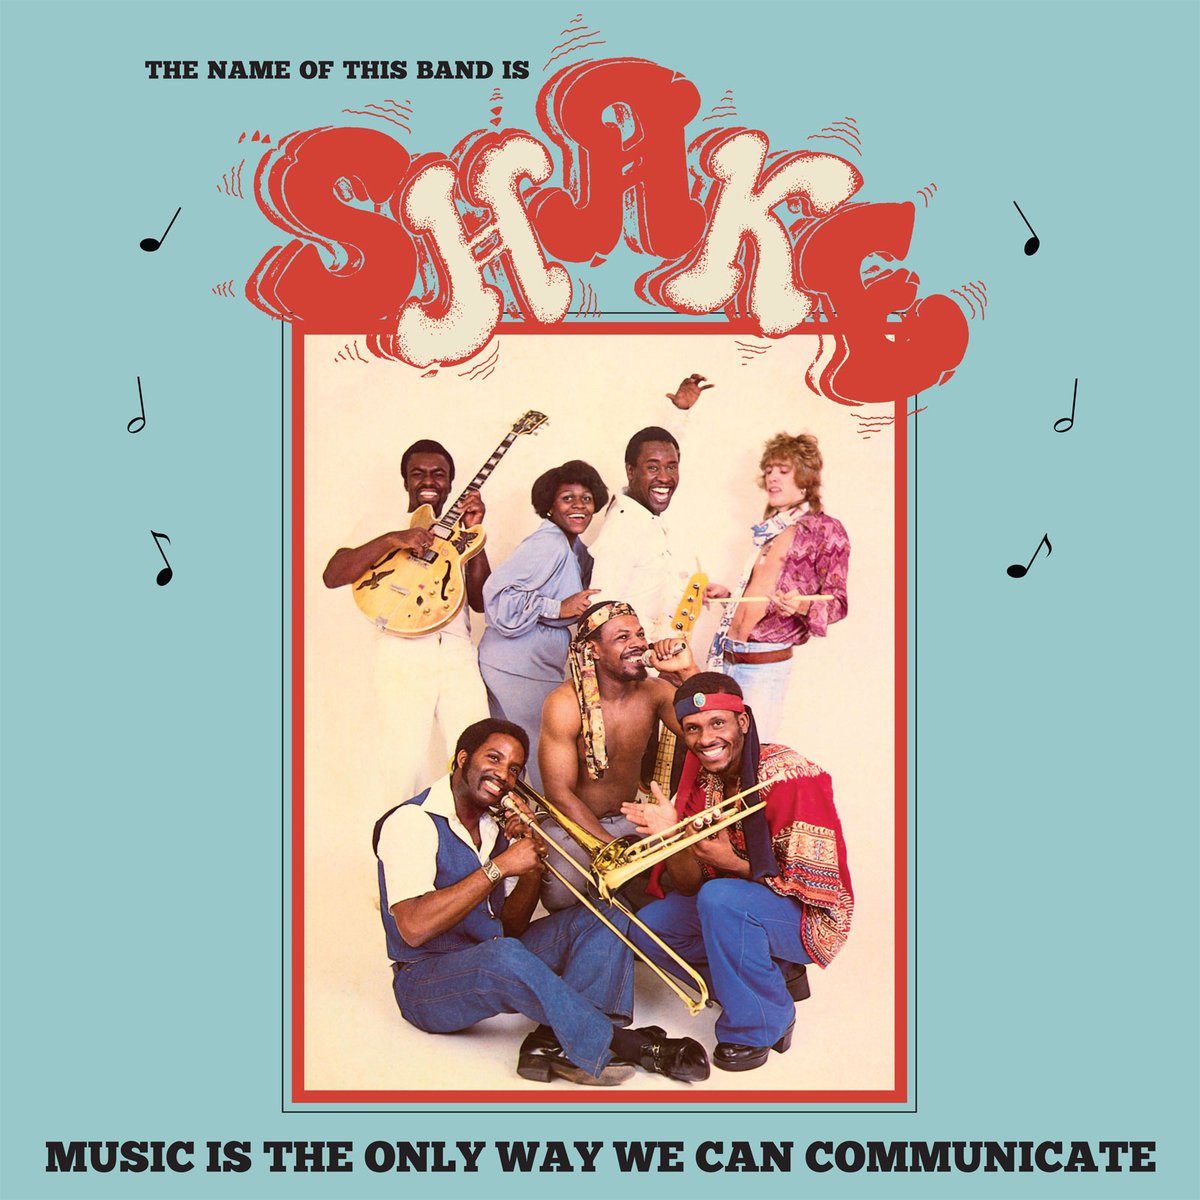 CD Shop - SHAKE MUSIC IS THE ONLY WAY WE CAN COMMUNICATE